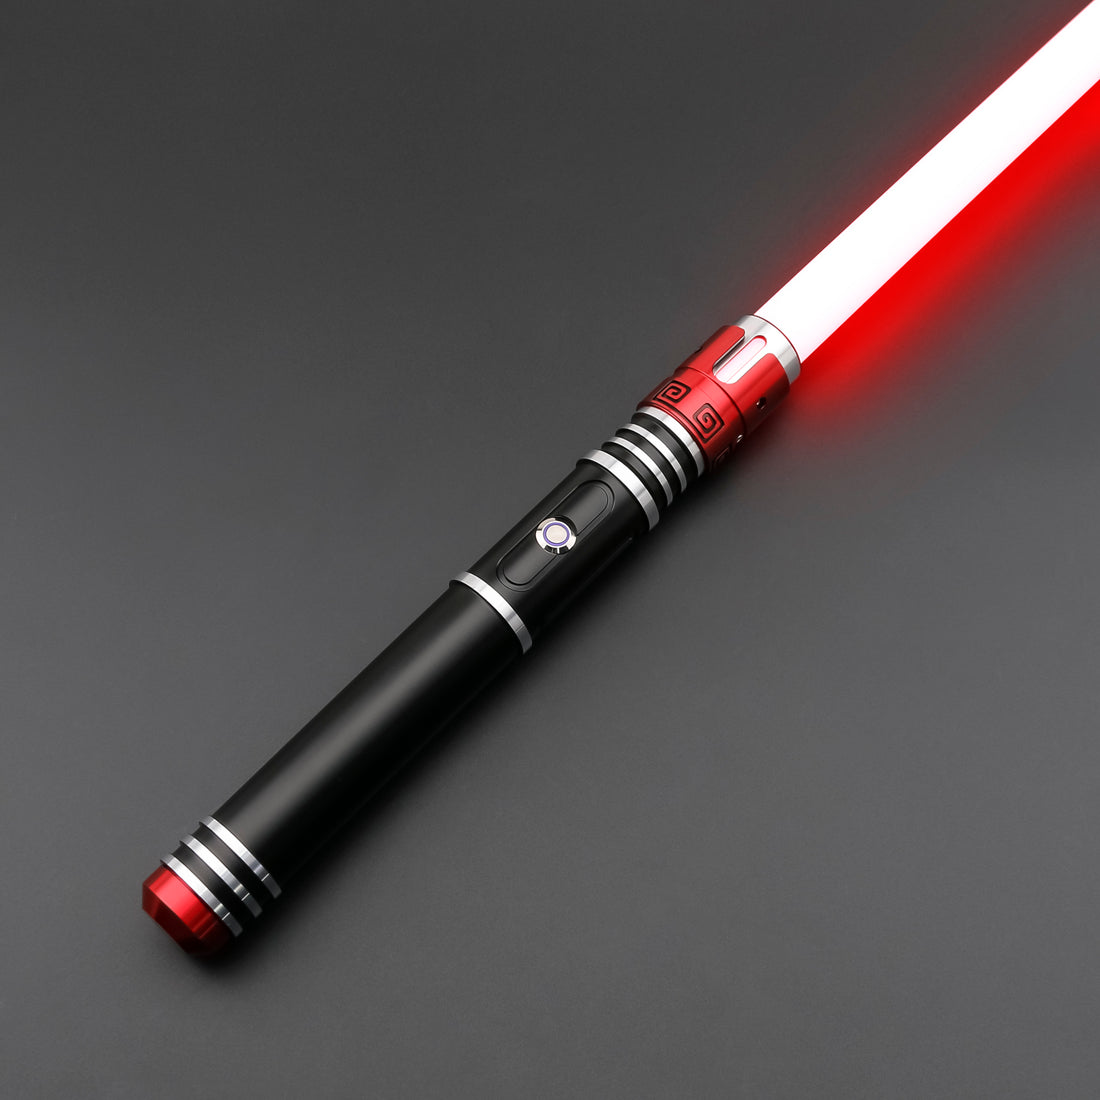 Acolyte red lightsaber